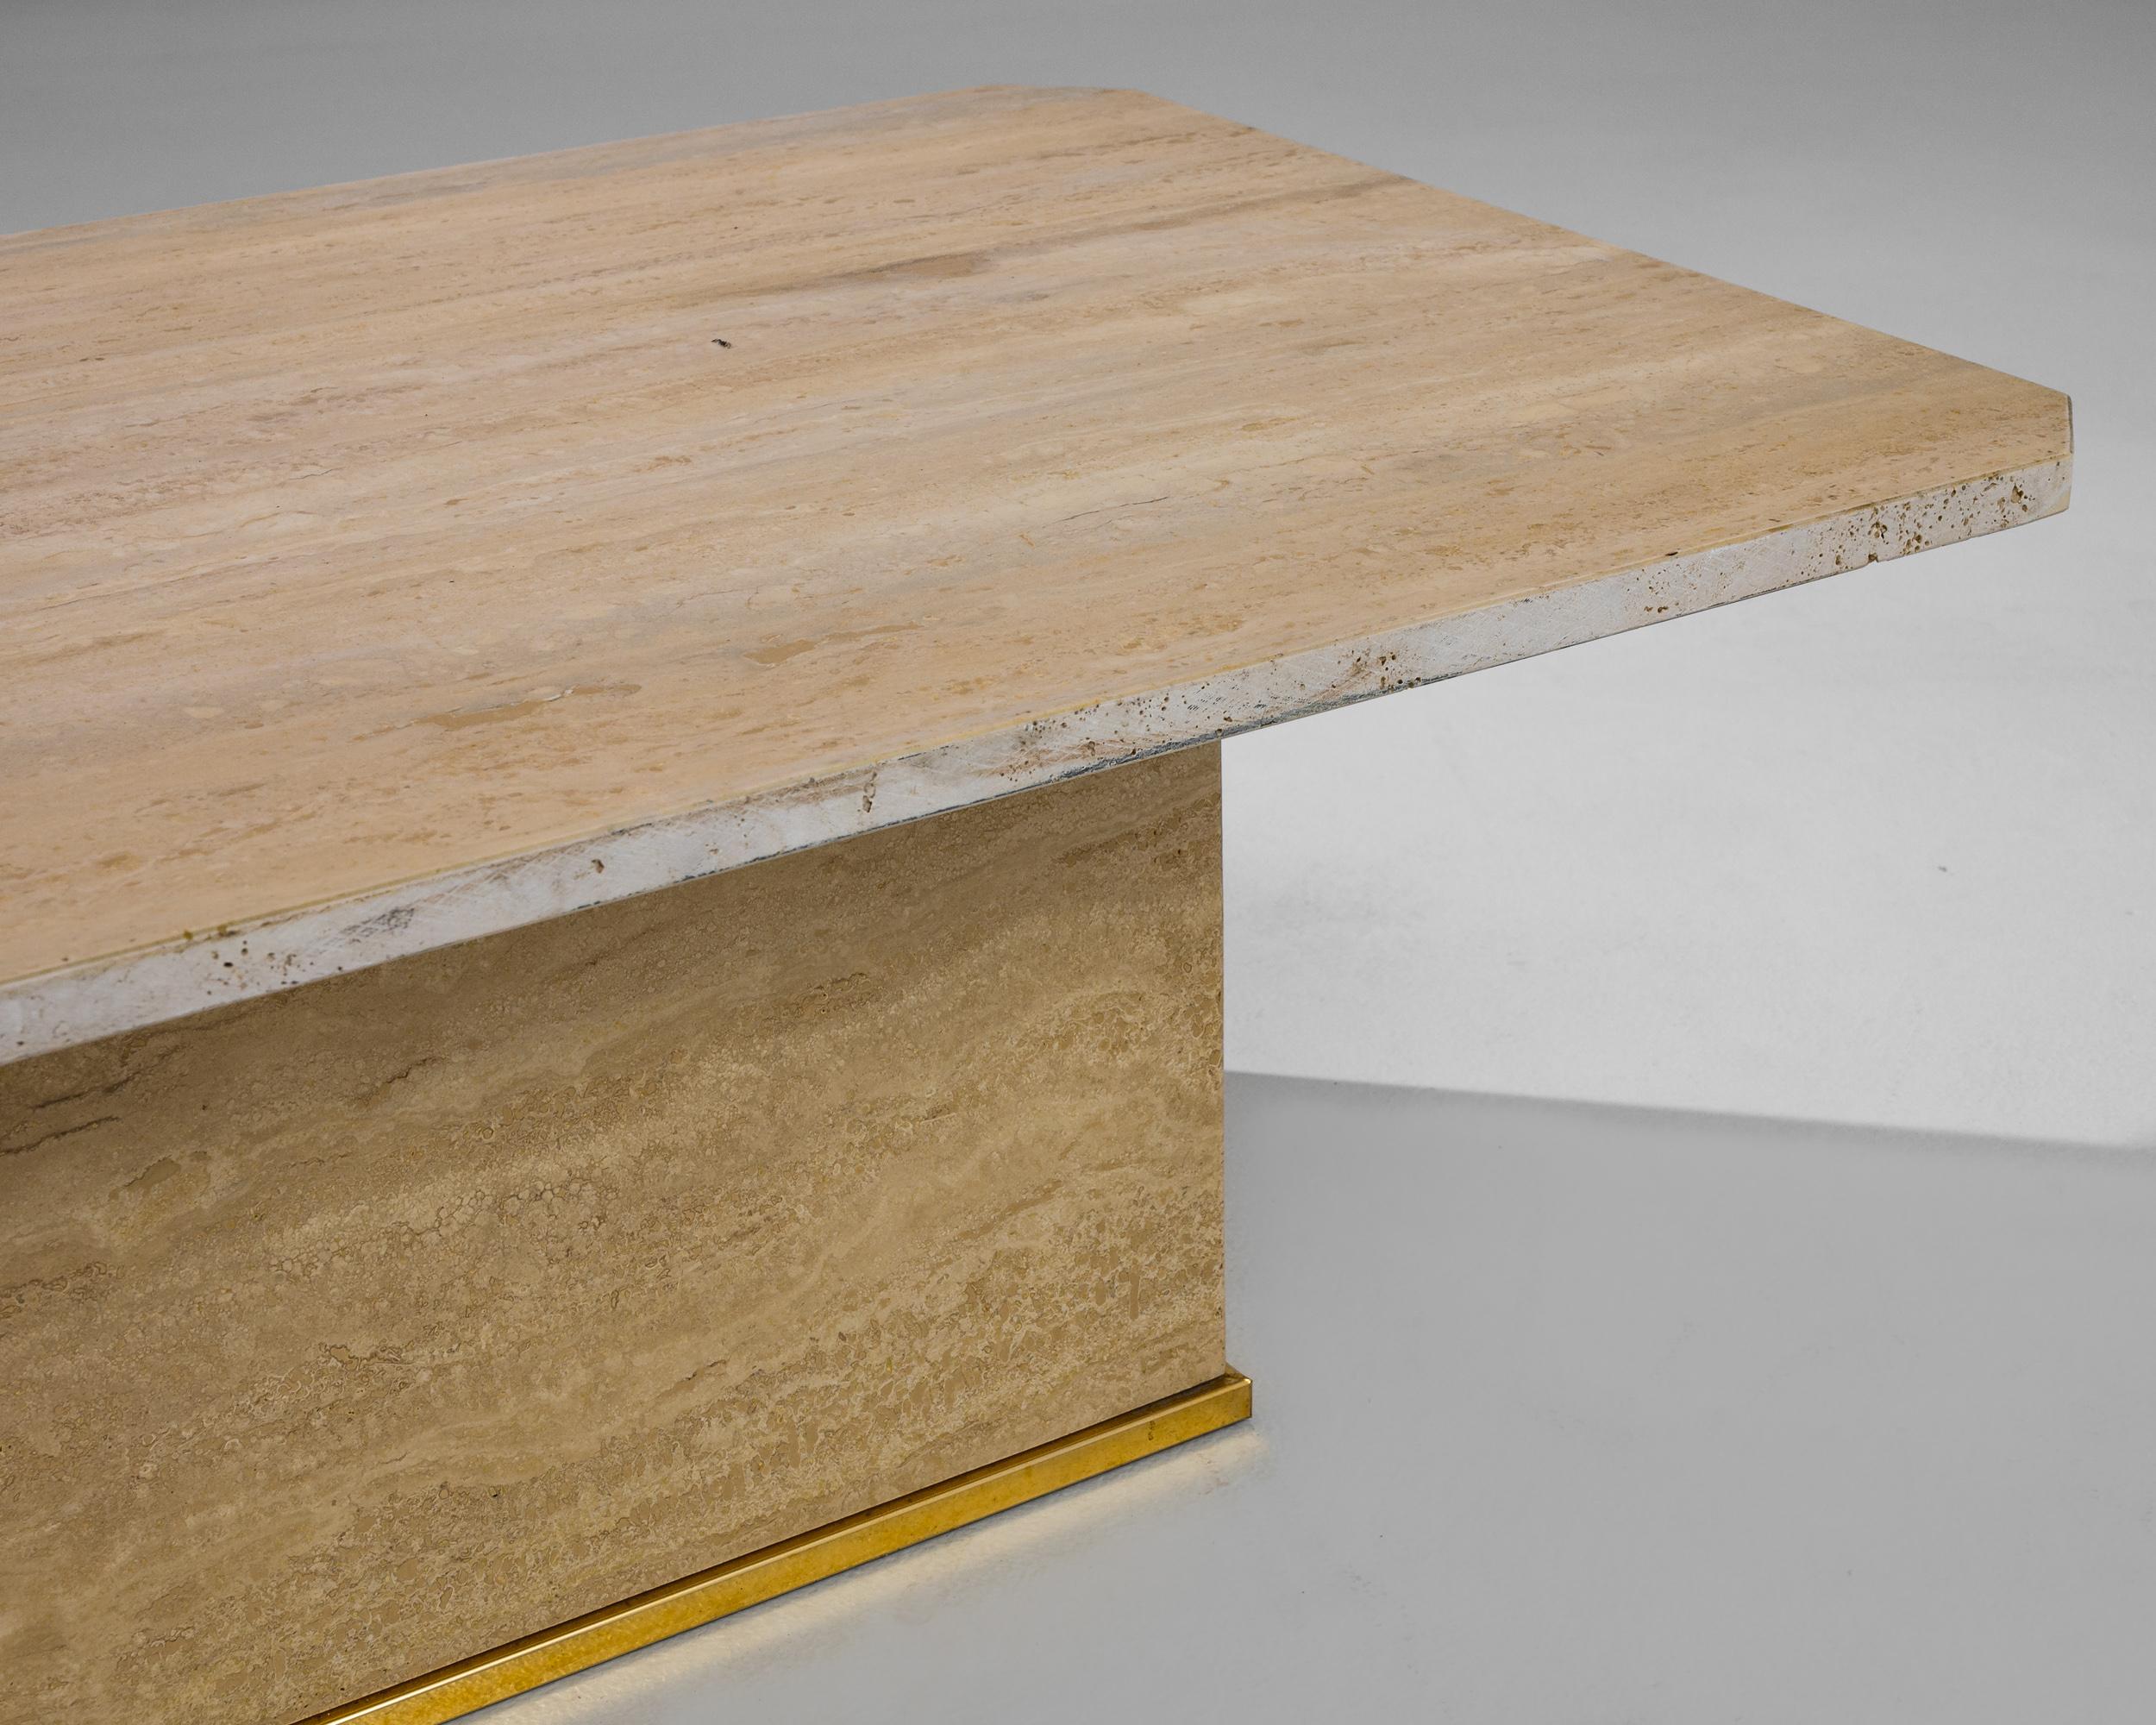 The formal simplicity and beautiful color of this travertine marble coffee table create an impression of minimalist luxury. Made in Italy in the 1970s, an oblong tabletop with gently rounded corners sits atop a low rectangle of stone. The butter